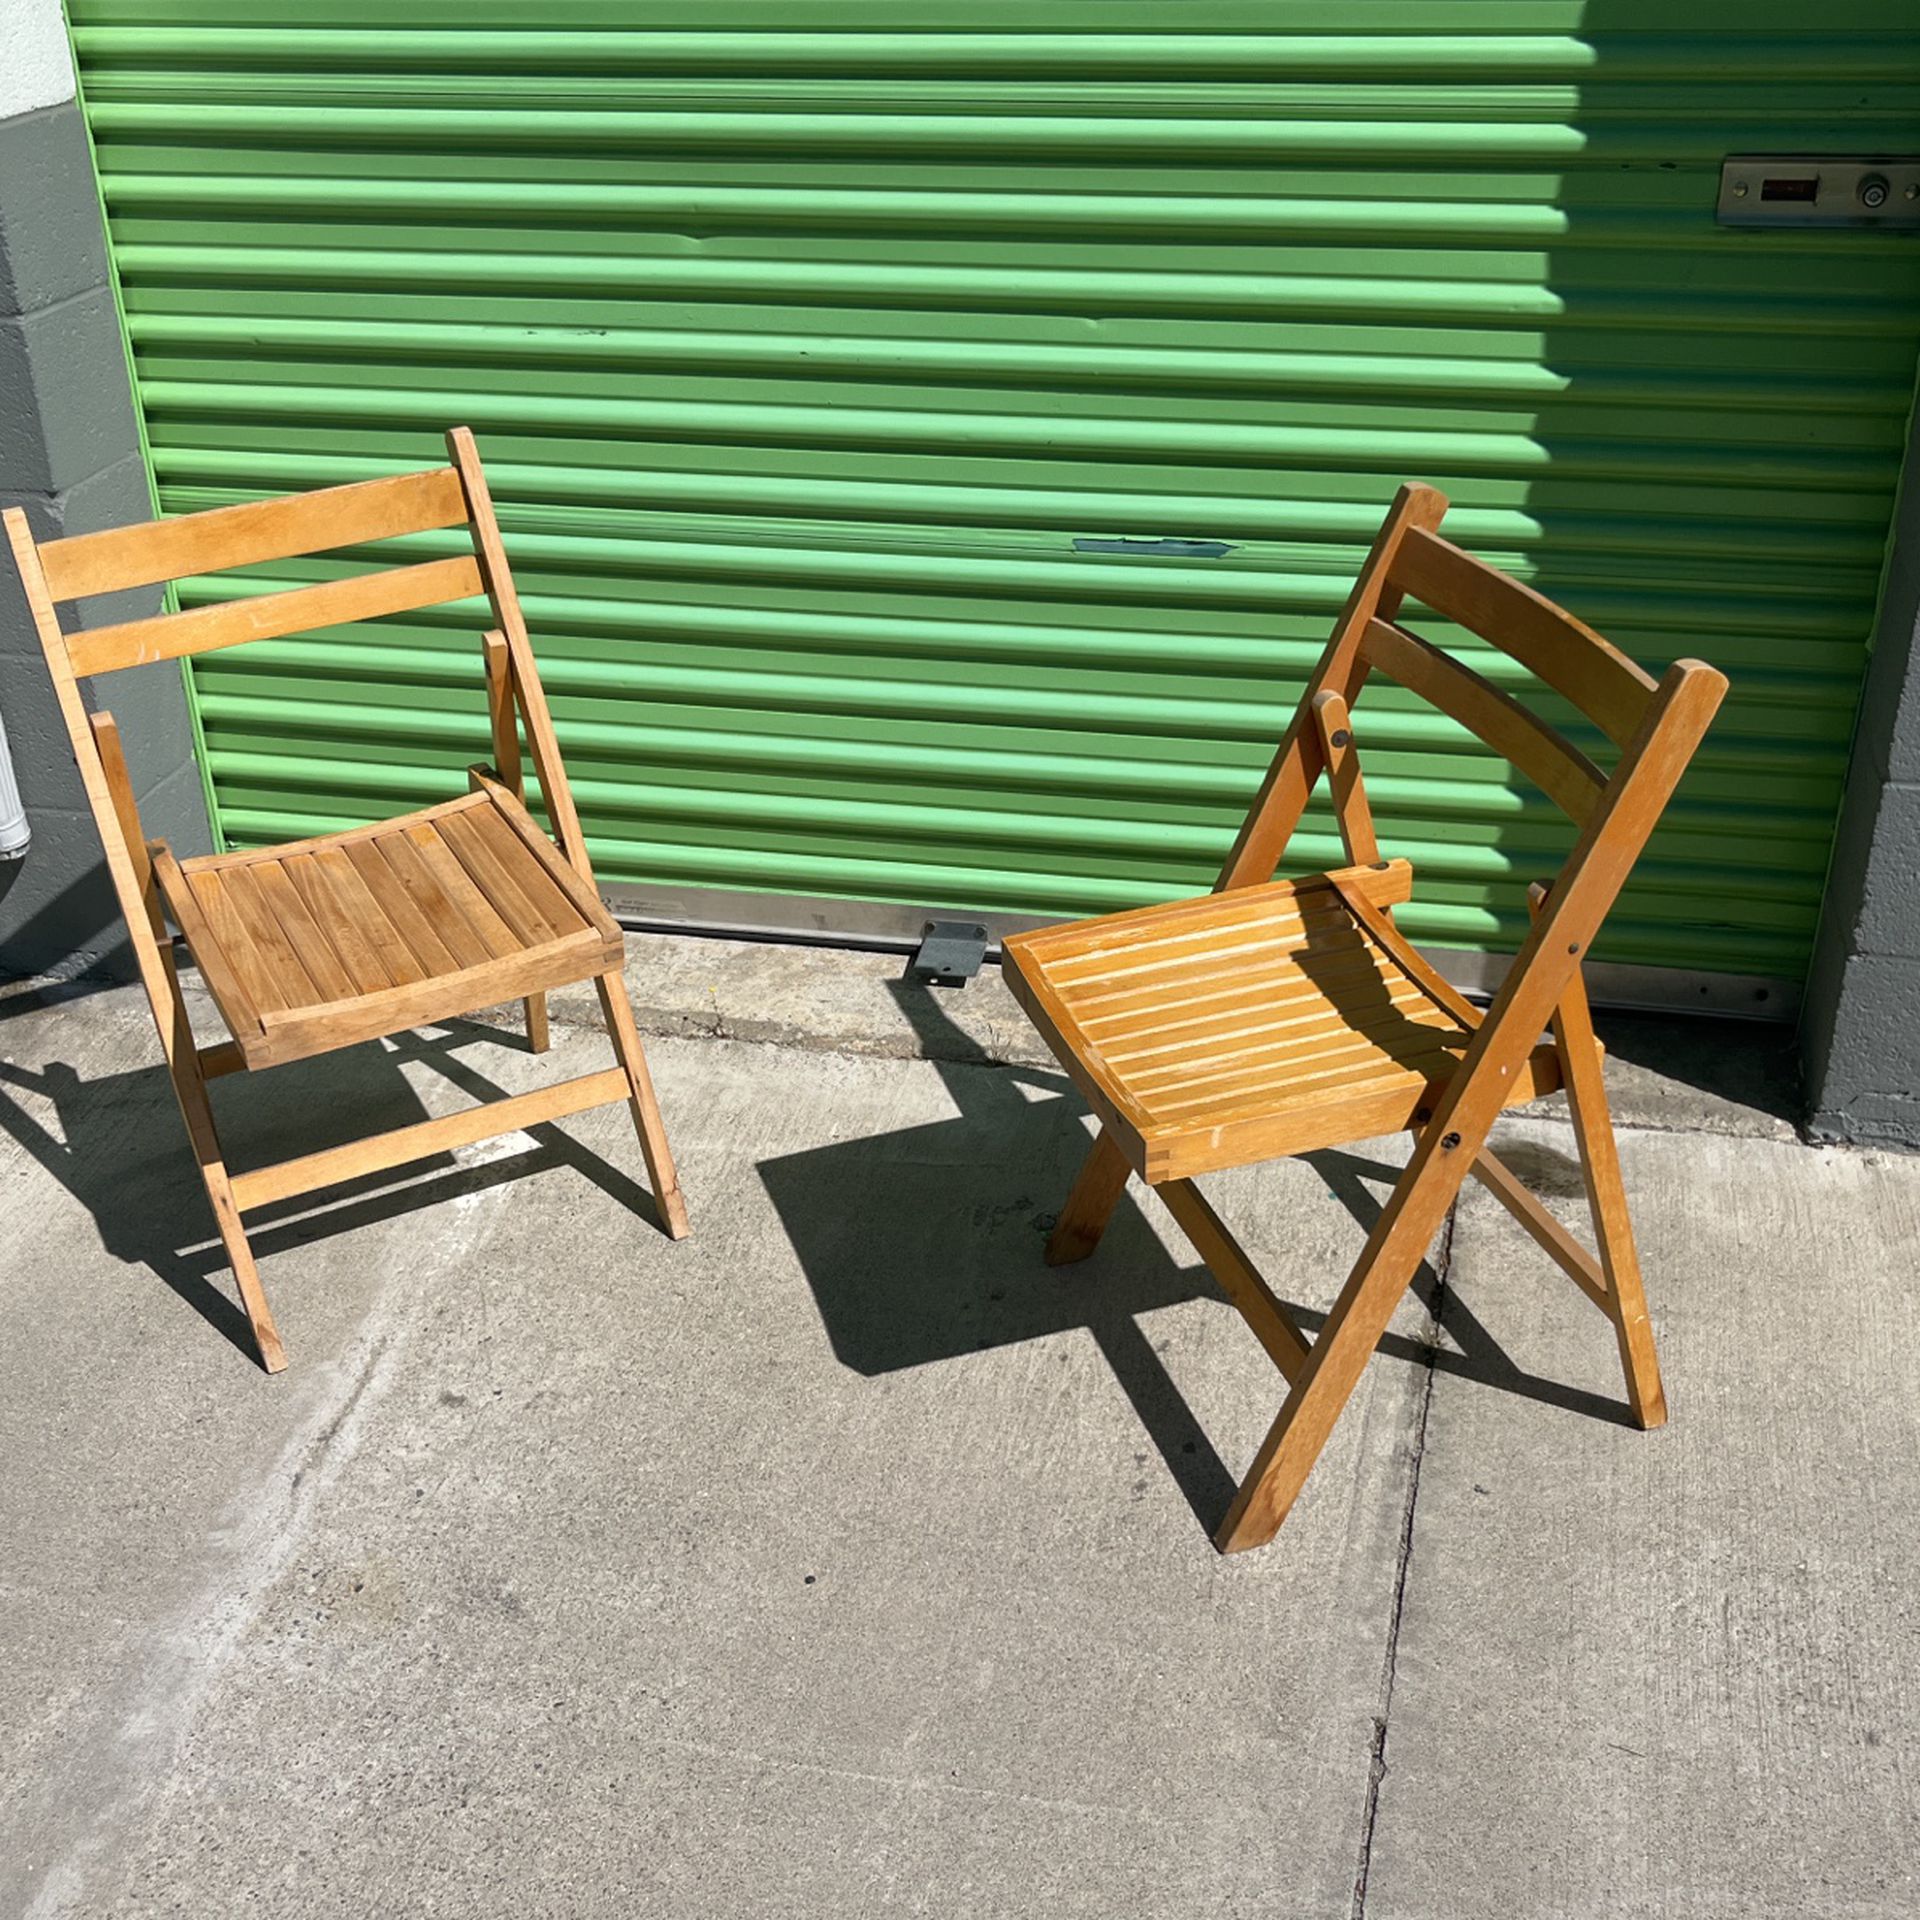 Pair Of Wooden Folding Chairs